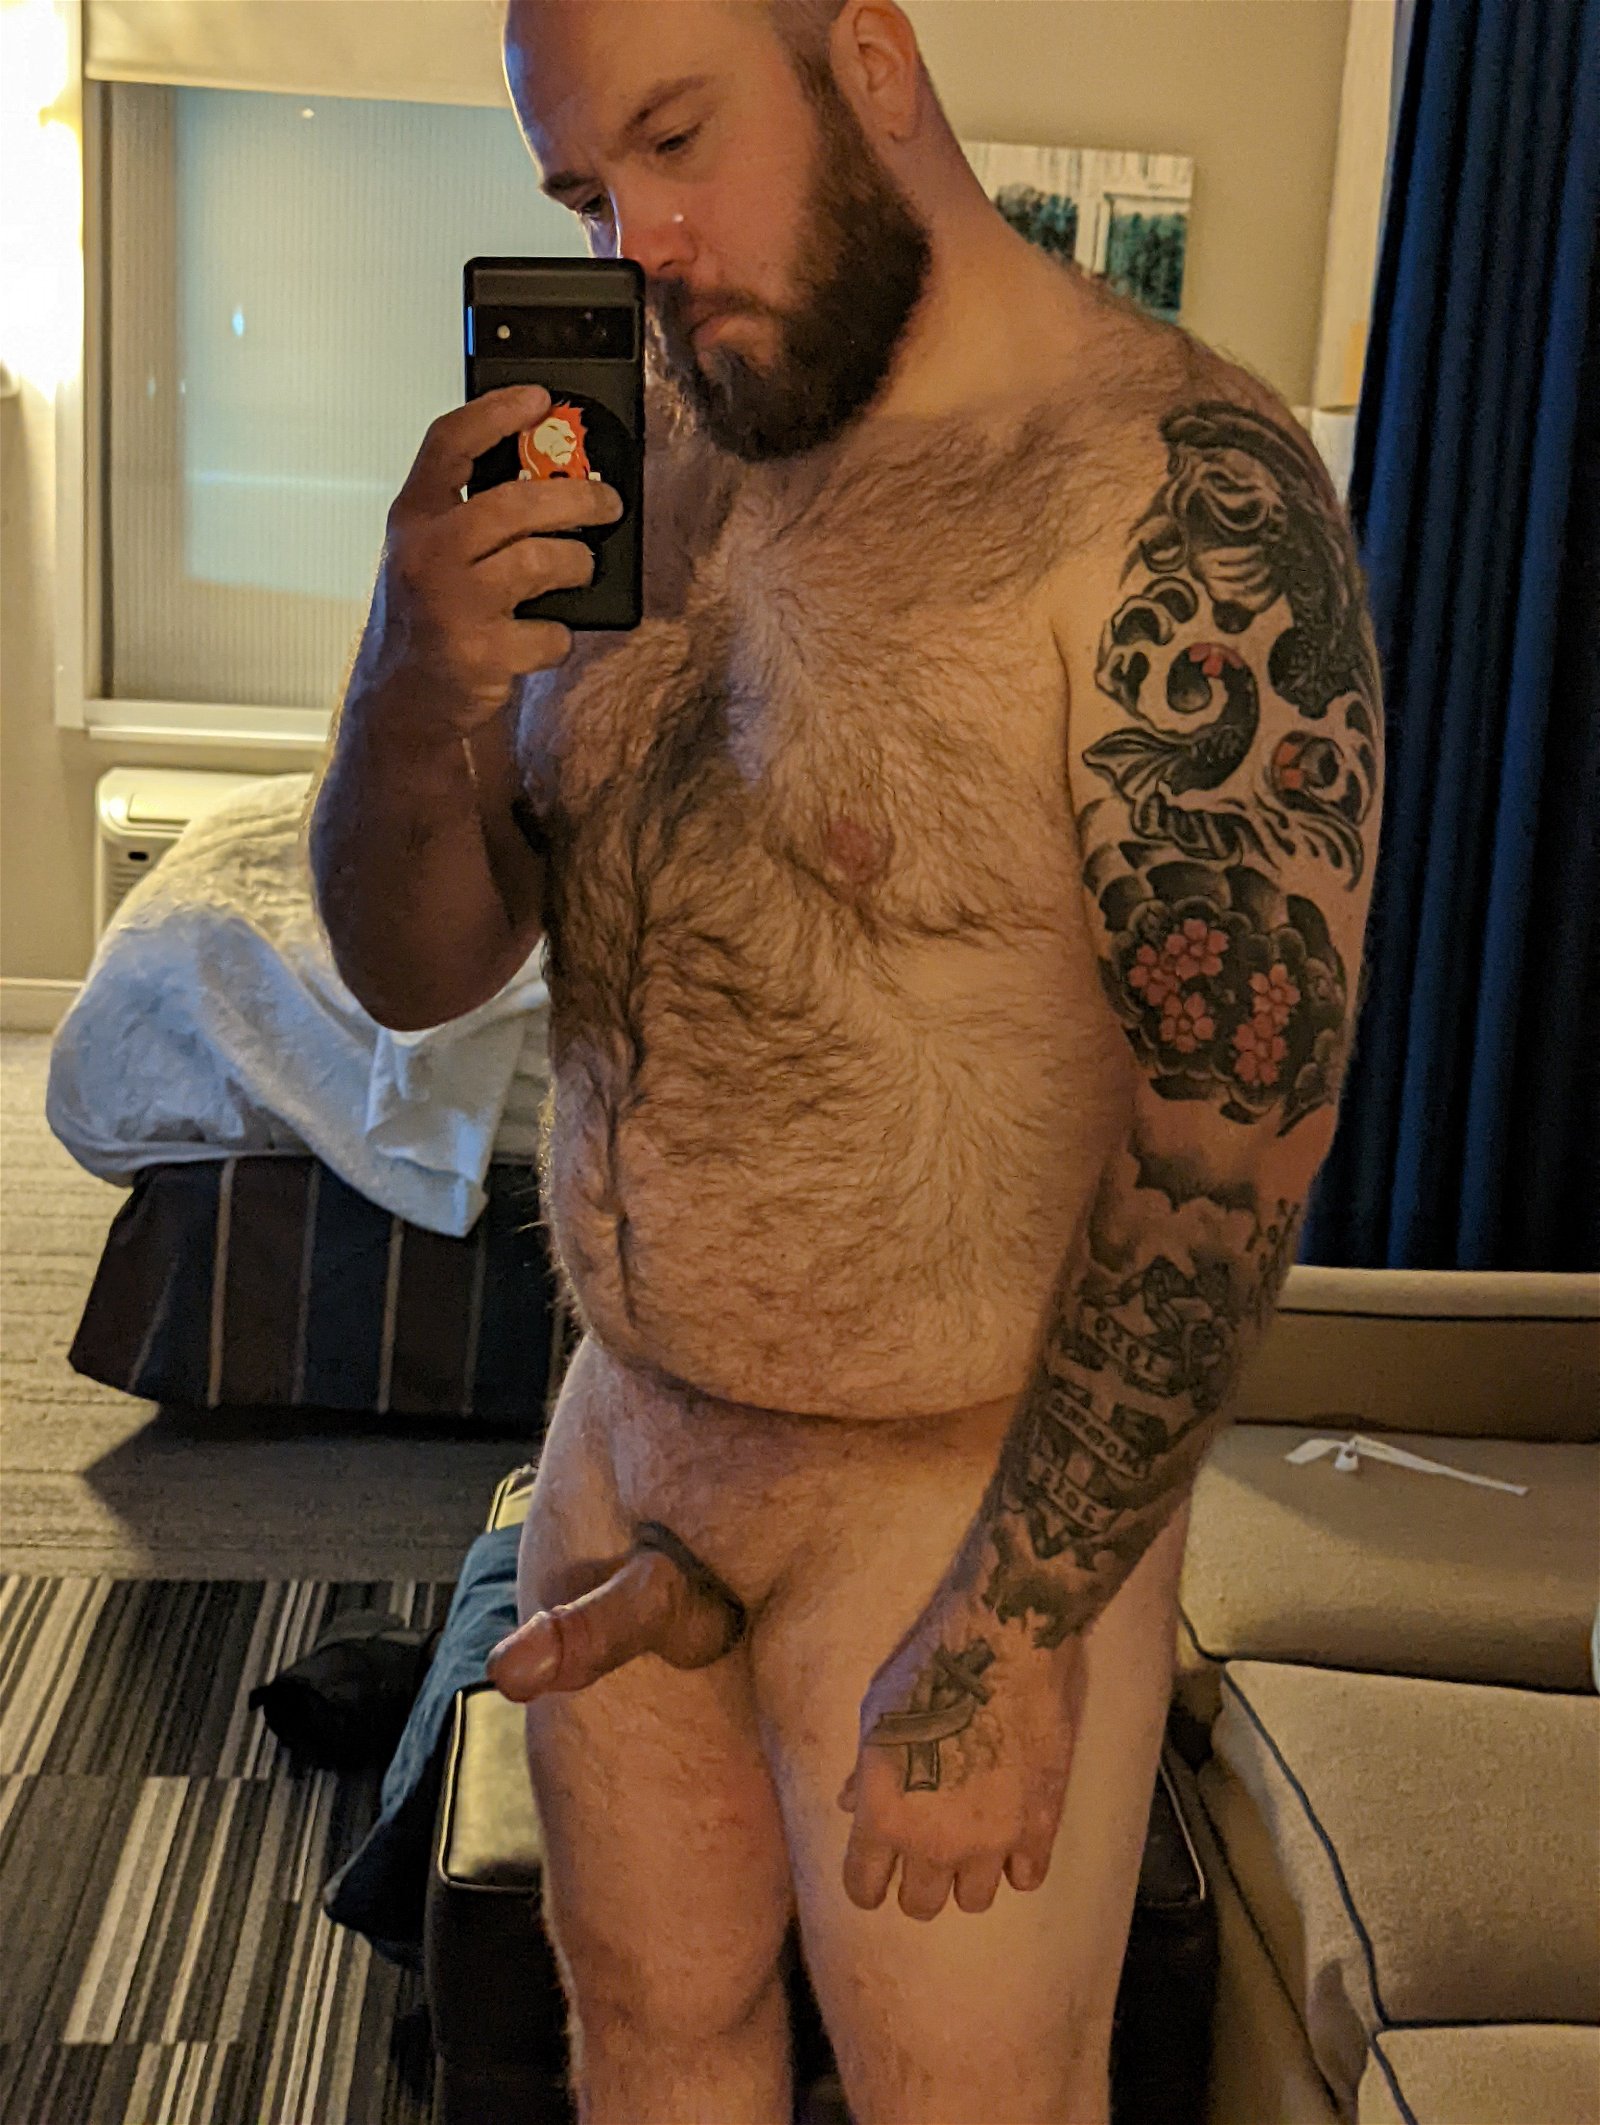 Photo by Micah87 with the username @Micah87,  April 29, 2022 at 3:55 AM. The post is about the topic Precum drip and the text says 'bored and horny'